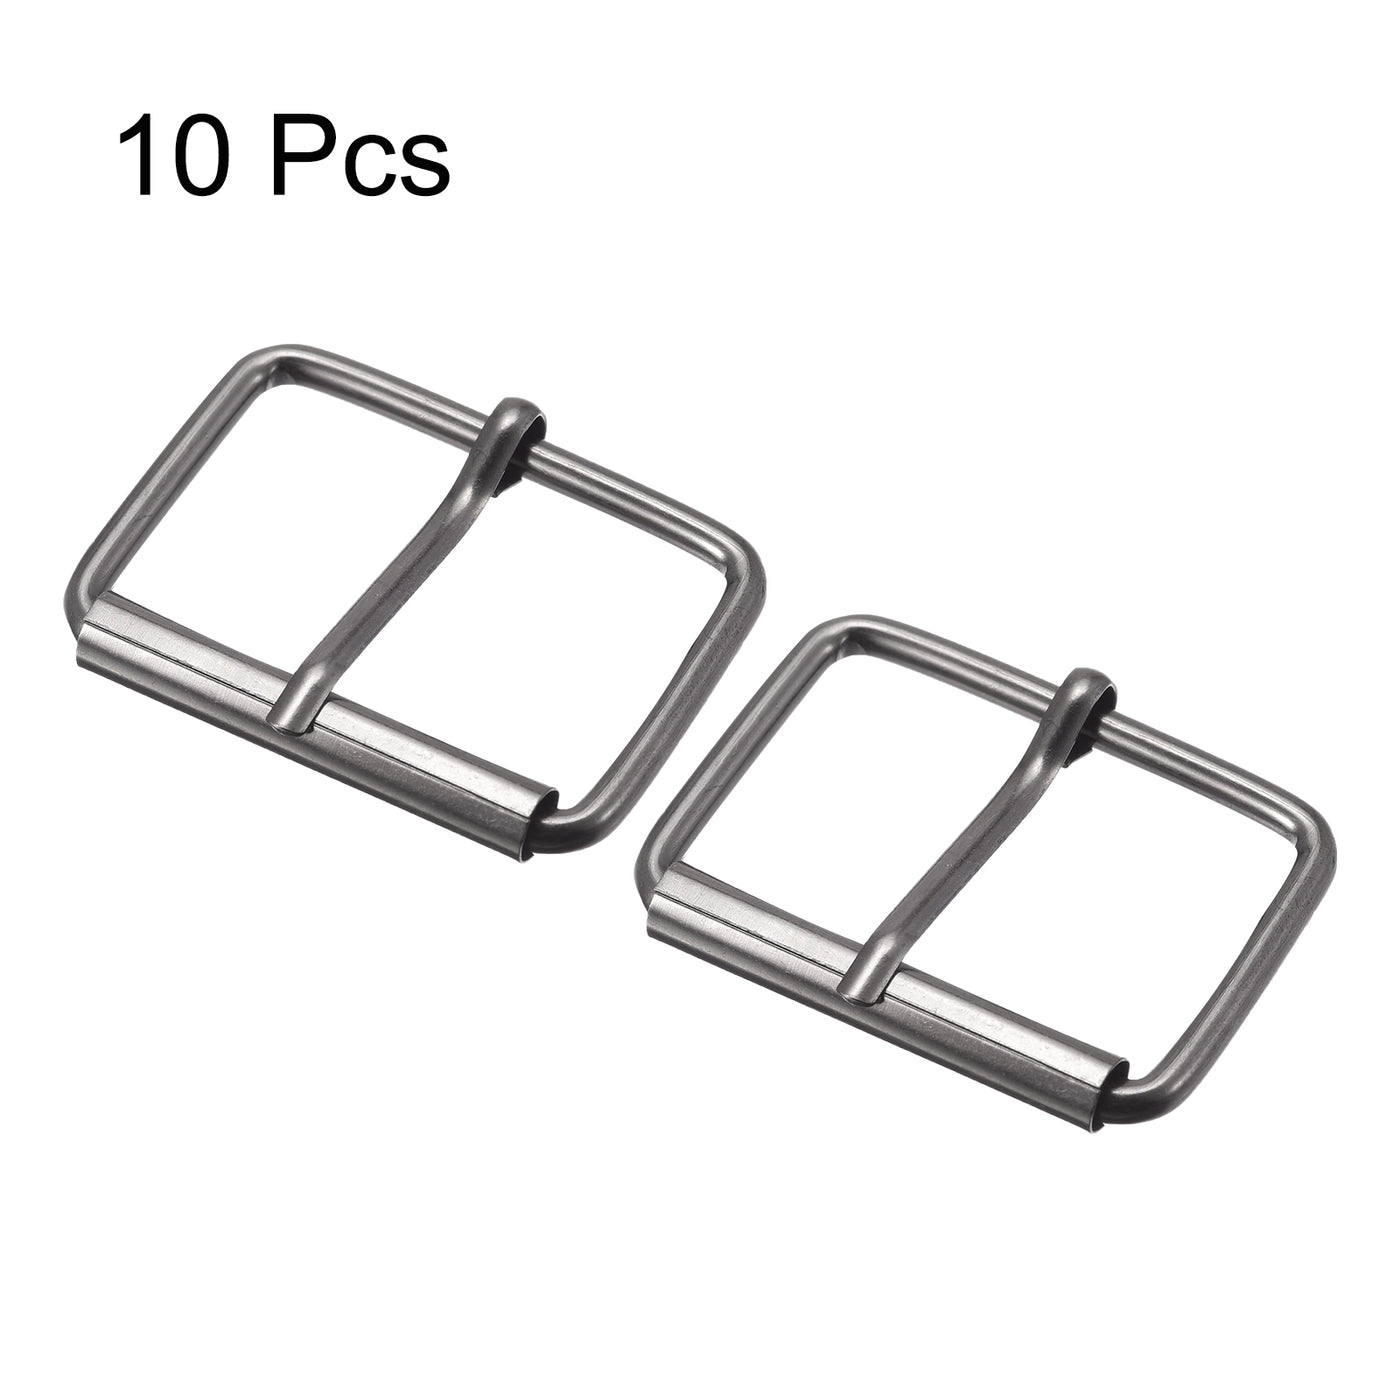 uxcell Uxcell 45mm(1.77") Metal Roller Buckles for Belts Bags Straps DIY Dark Gray 10pcs